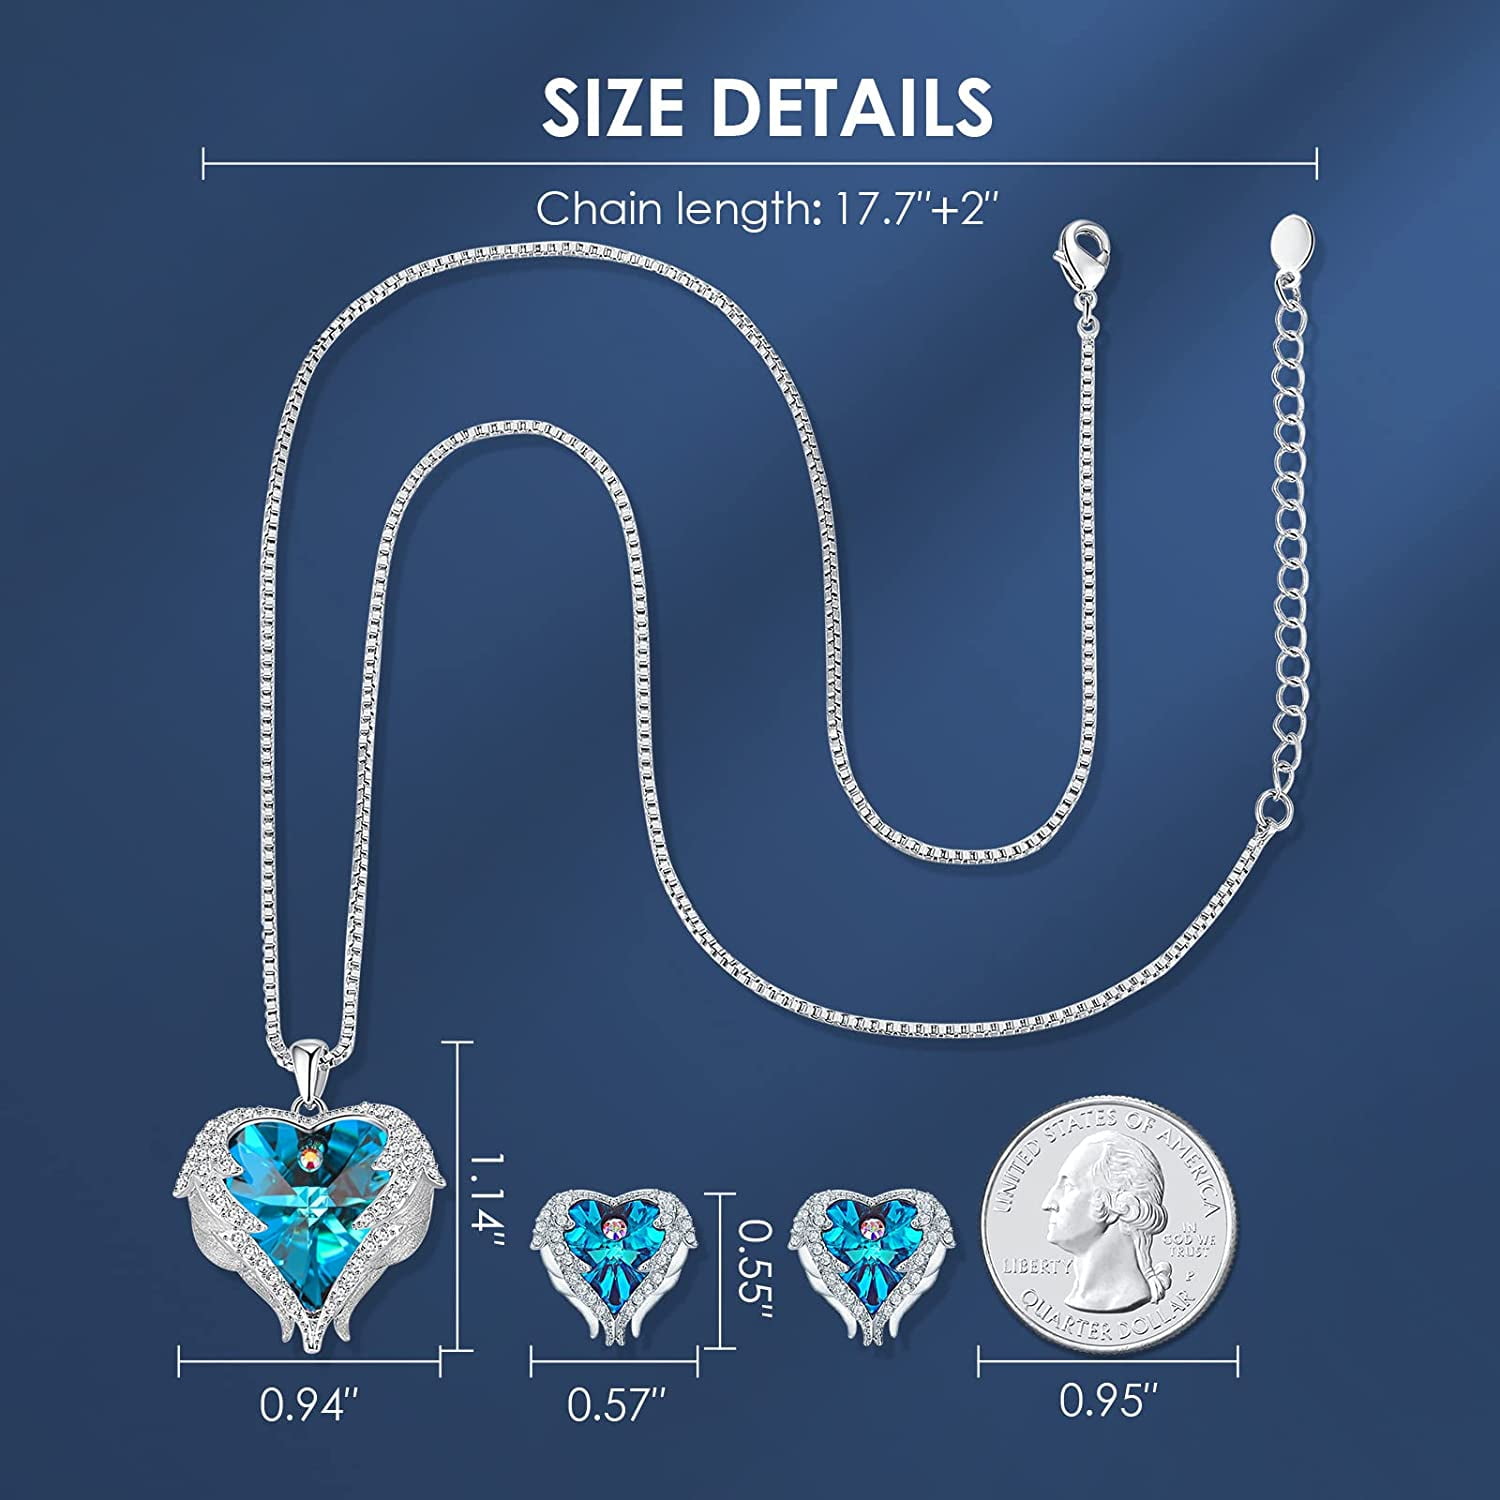  QVY Love Necklace for Women Medallion CZ Halo Eternity Circle  Pendant Mothers Day Gifts Meaningful Jewelry Gift for Her [CN-LV-G] :  Clothing, Shoes & Jewelry